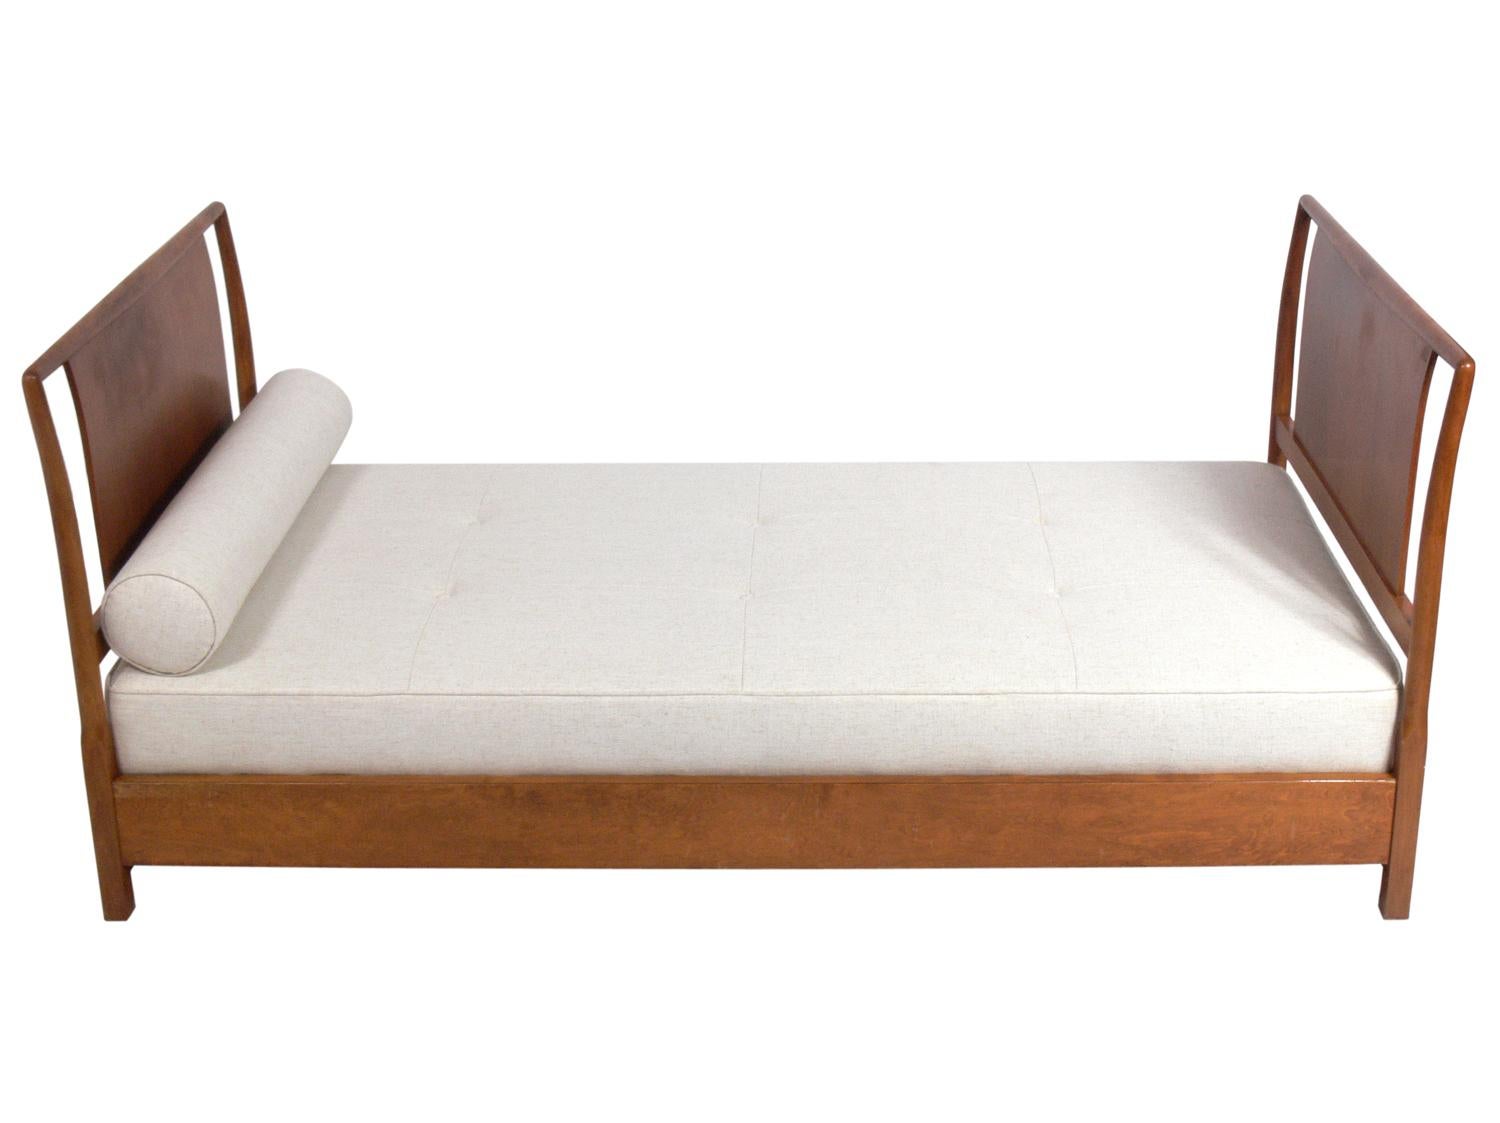 Elegant daybed, designed by T.H. Robsjohn-Gibbings for Widdicomb, American, circa 1950s. This daybed is currently being refinished and can be completed in your choice of color. The price noted below includes refinishing. It has been reupholstered in